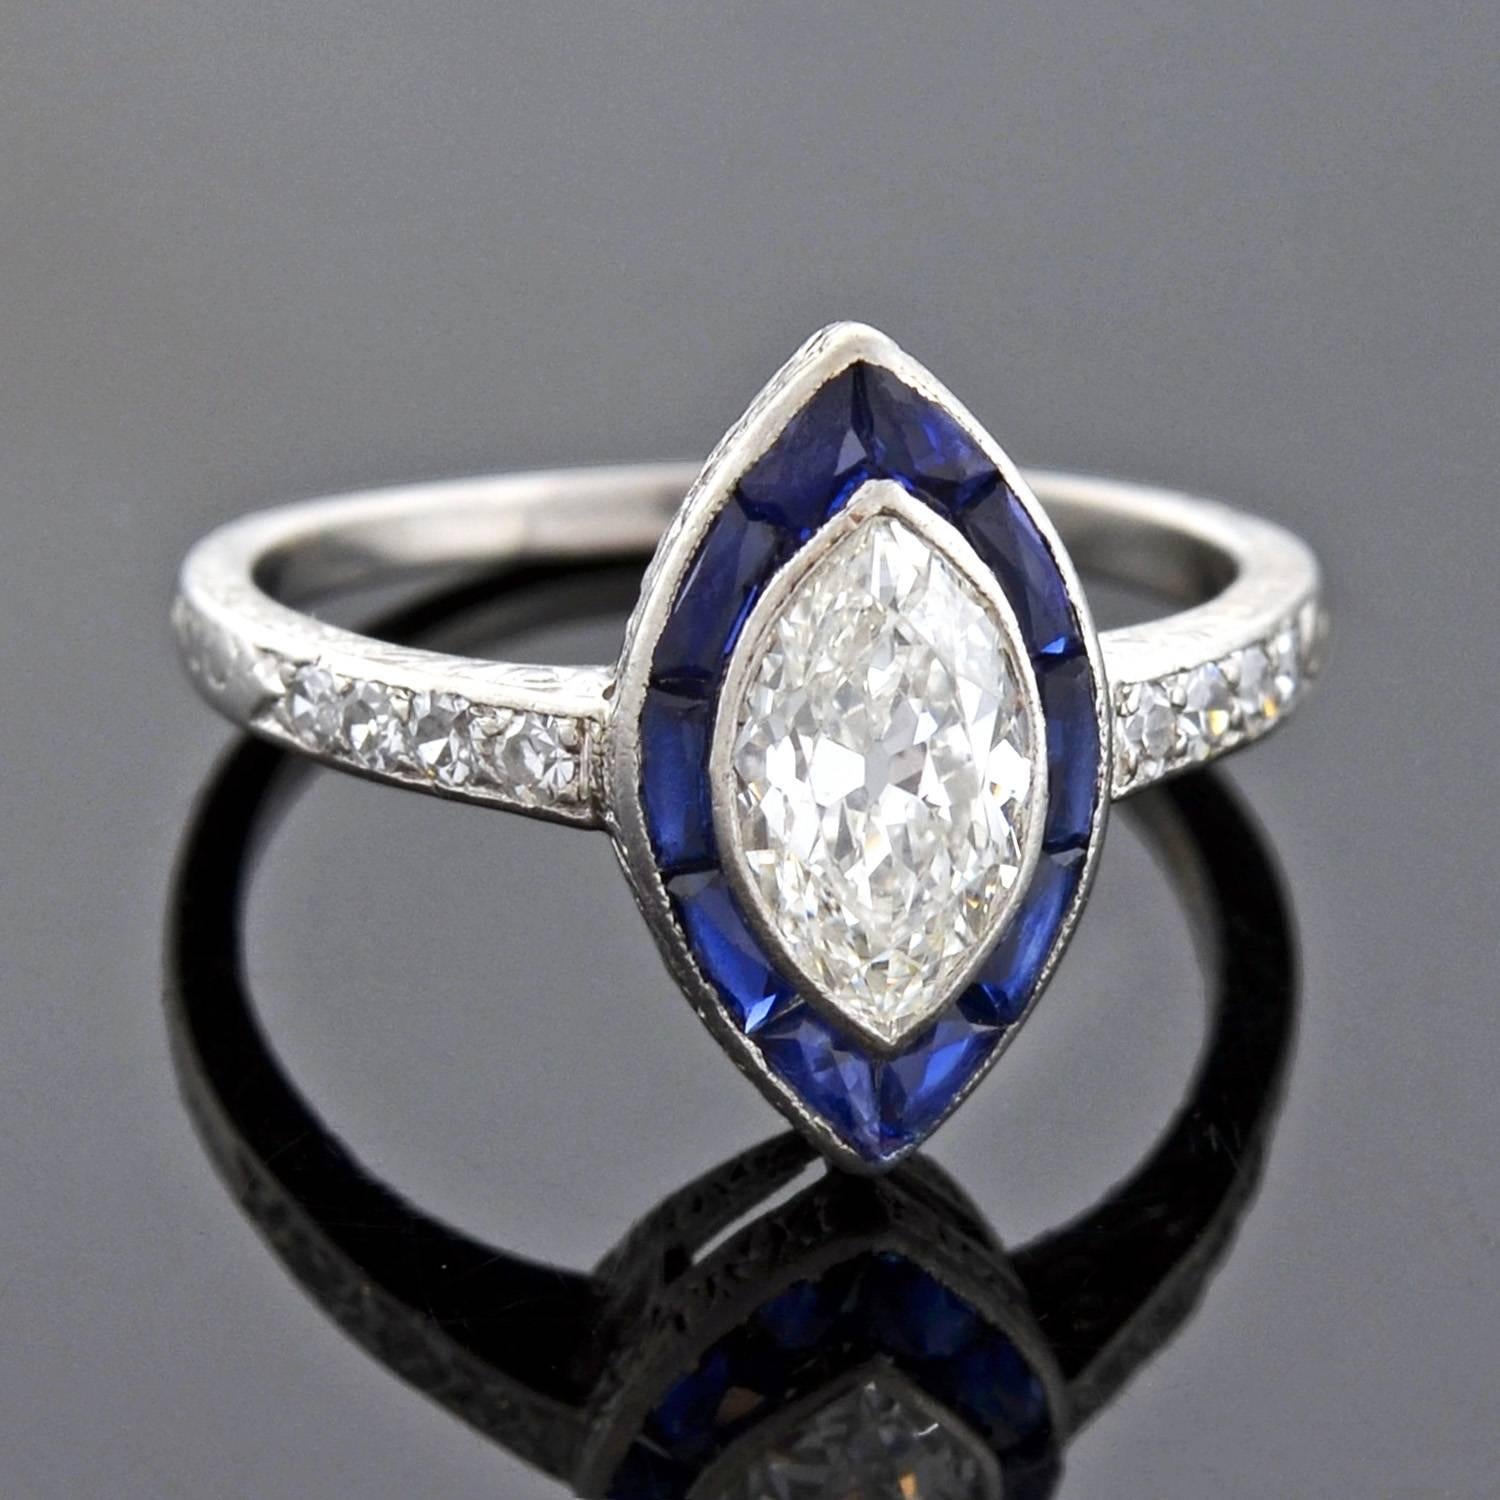 A gorgeous diamond and sapphire ring from the Art Deco (ca1920) era! Made of platinum, the ring frames a sparkling marquise diamond at the center of a sapphire border. The central diamond weighs 1.00ct, and has K color and VS2 clarity. Lining the